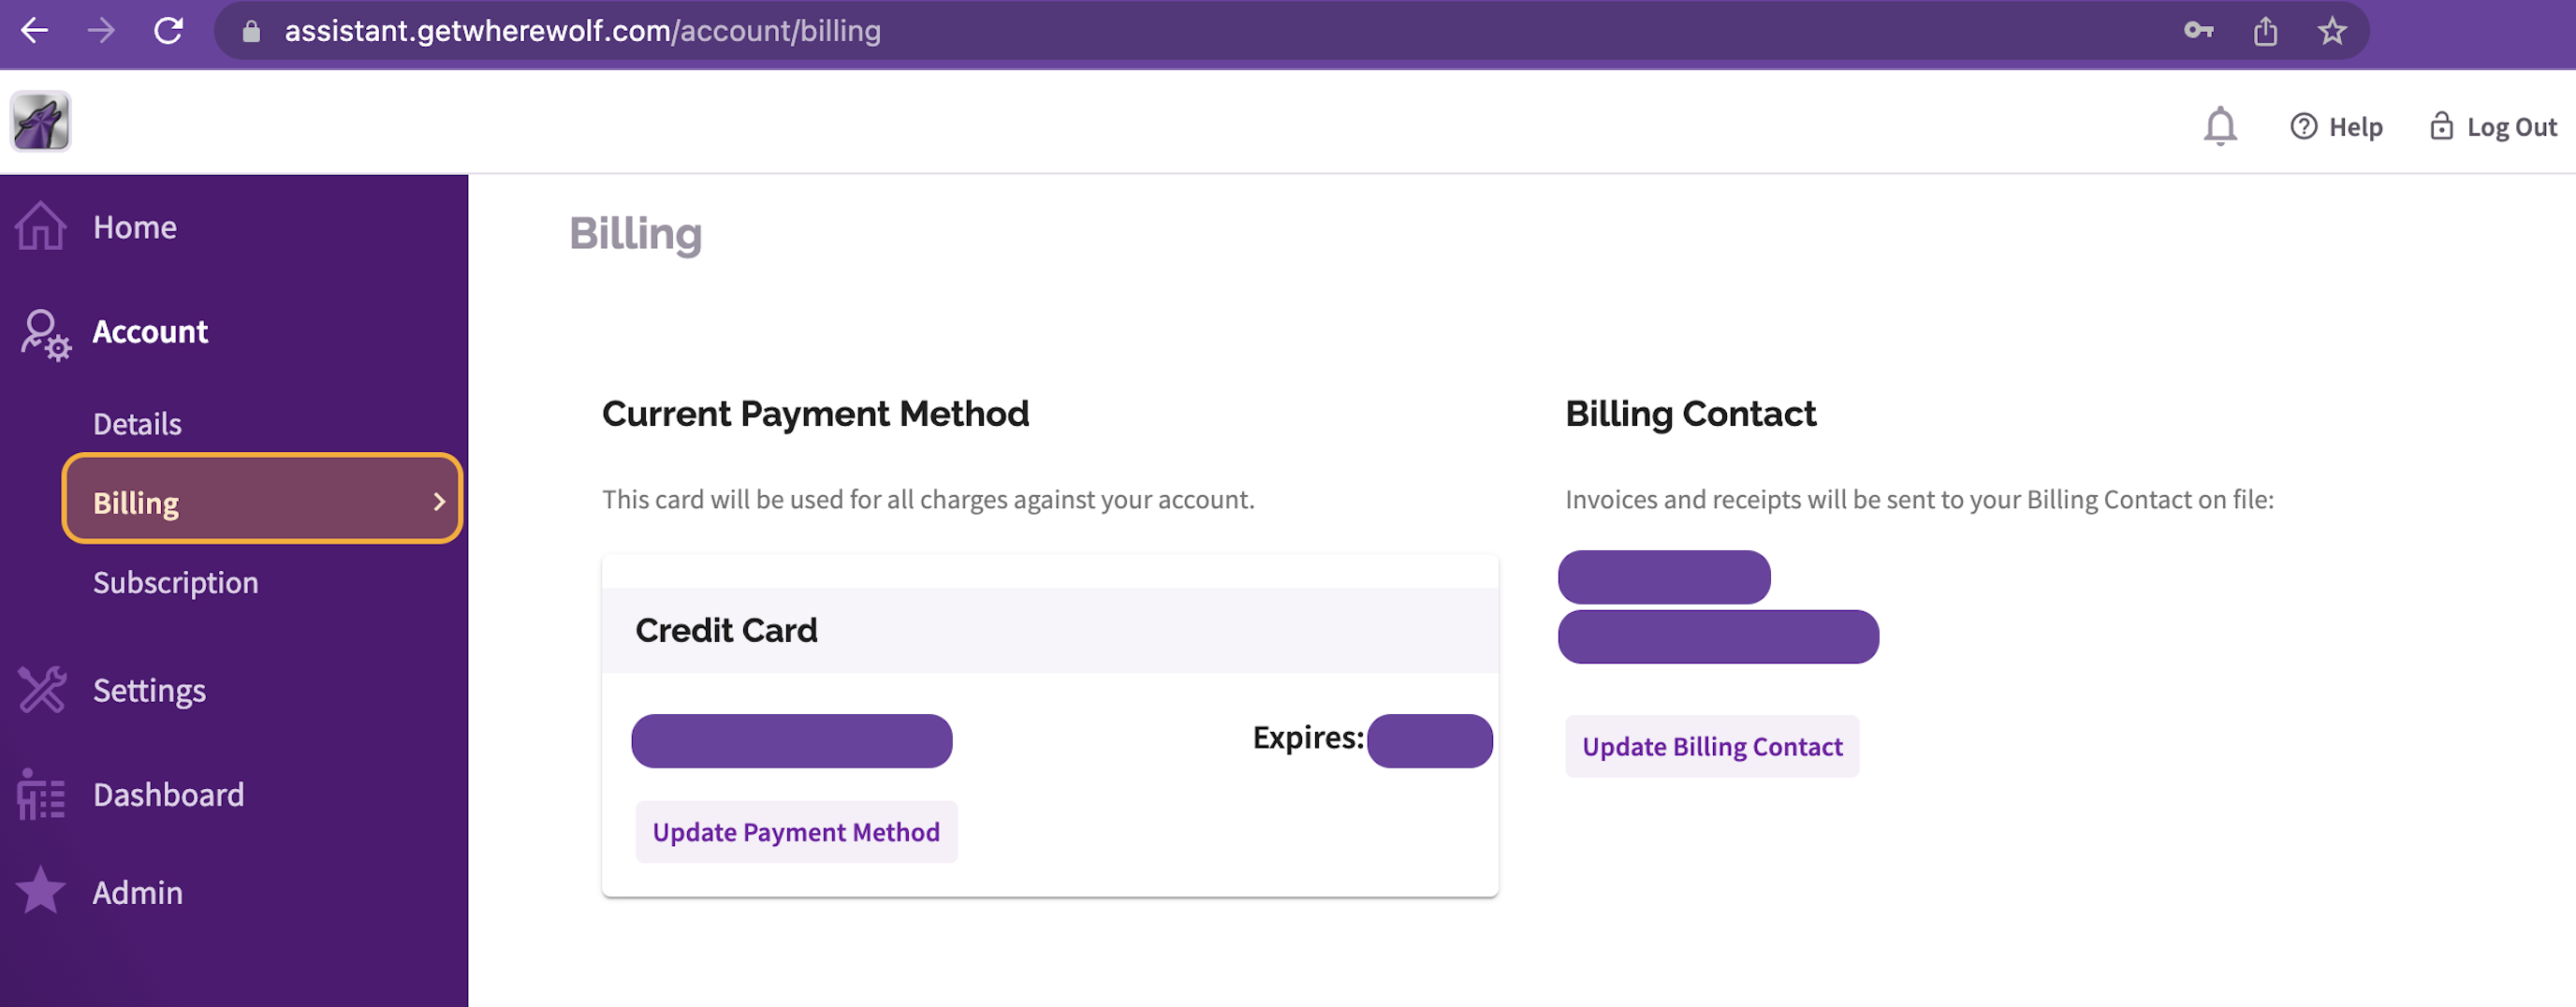 assistant_billing_page.png